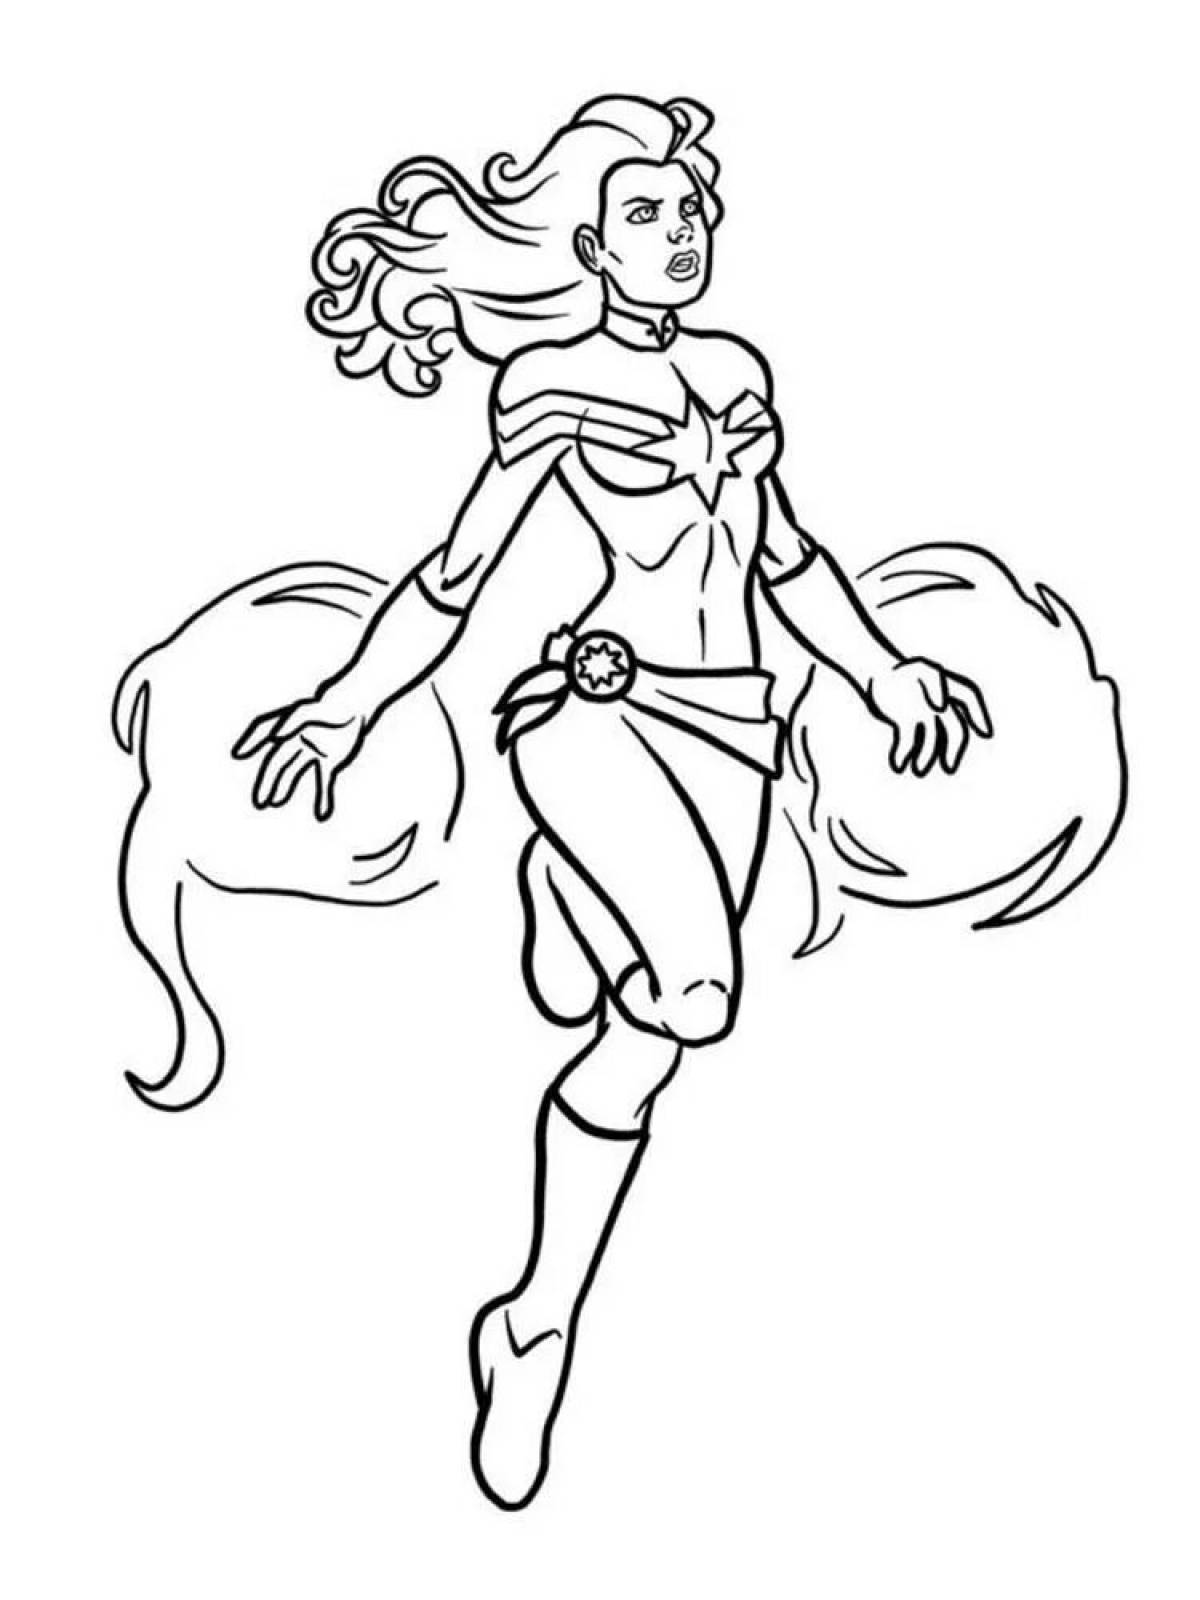 Coloring page magnanimous captain marvel